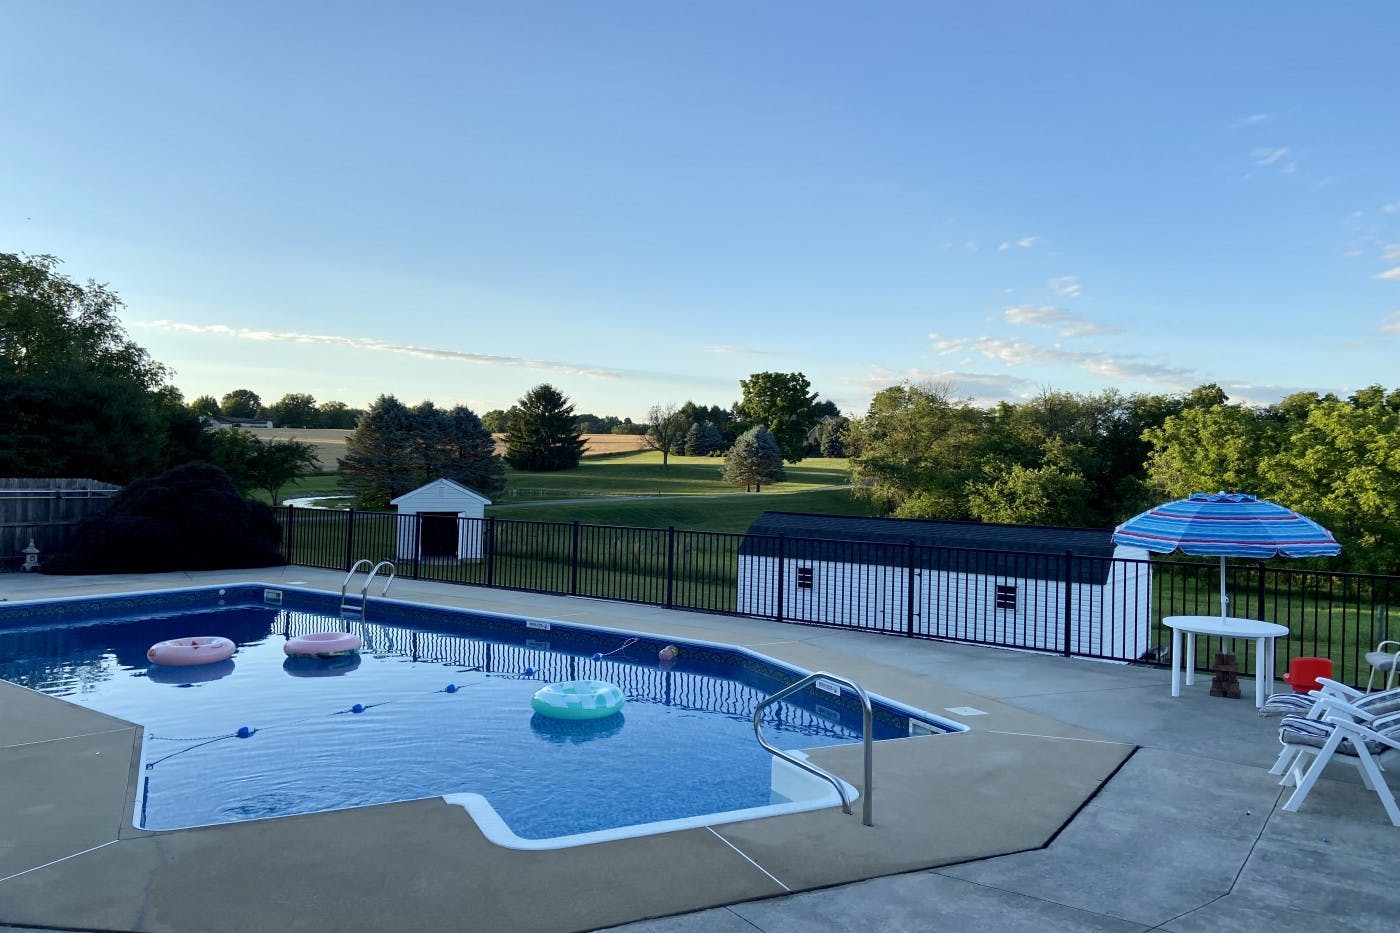 Huge pool in gorgeous country near Manheim. Book your next party with us!